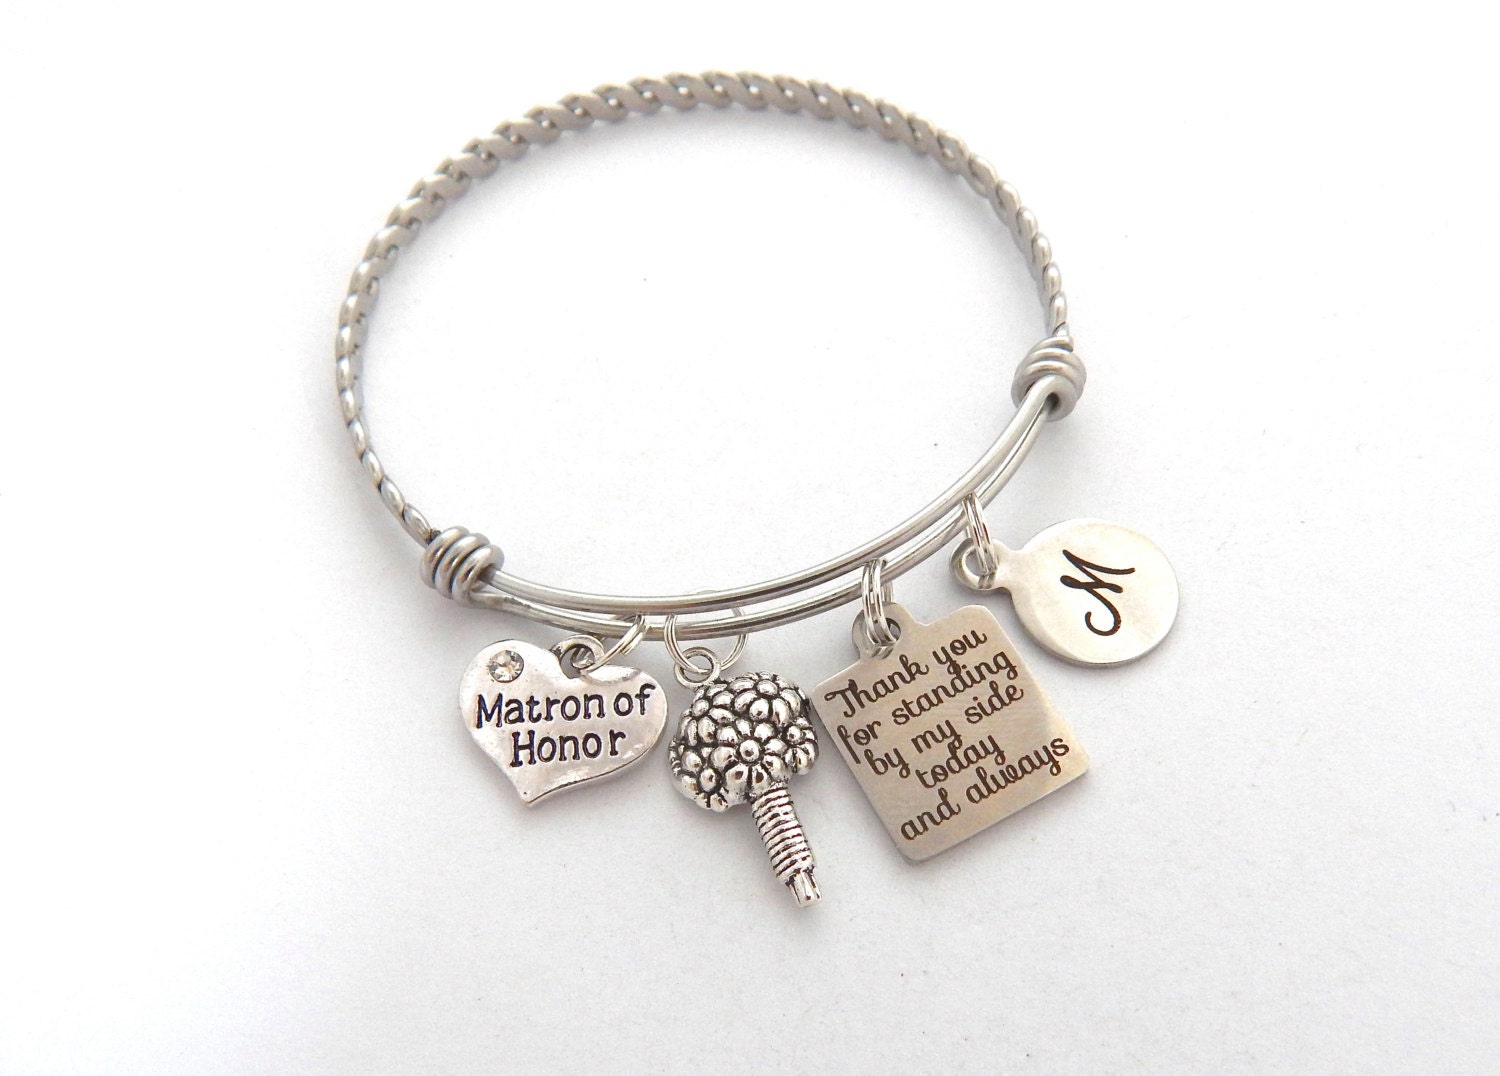 Matron of Honor Gift, Maid of Honor Bracelet, Gift for Bridesmaid, BANGLE, Thank You for standing by my side, PERSONALIZED Best Friend Gift